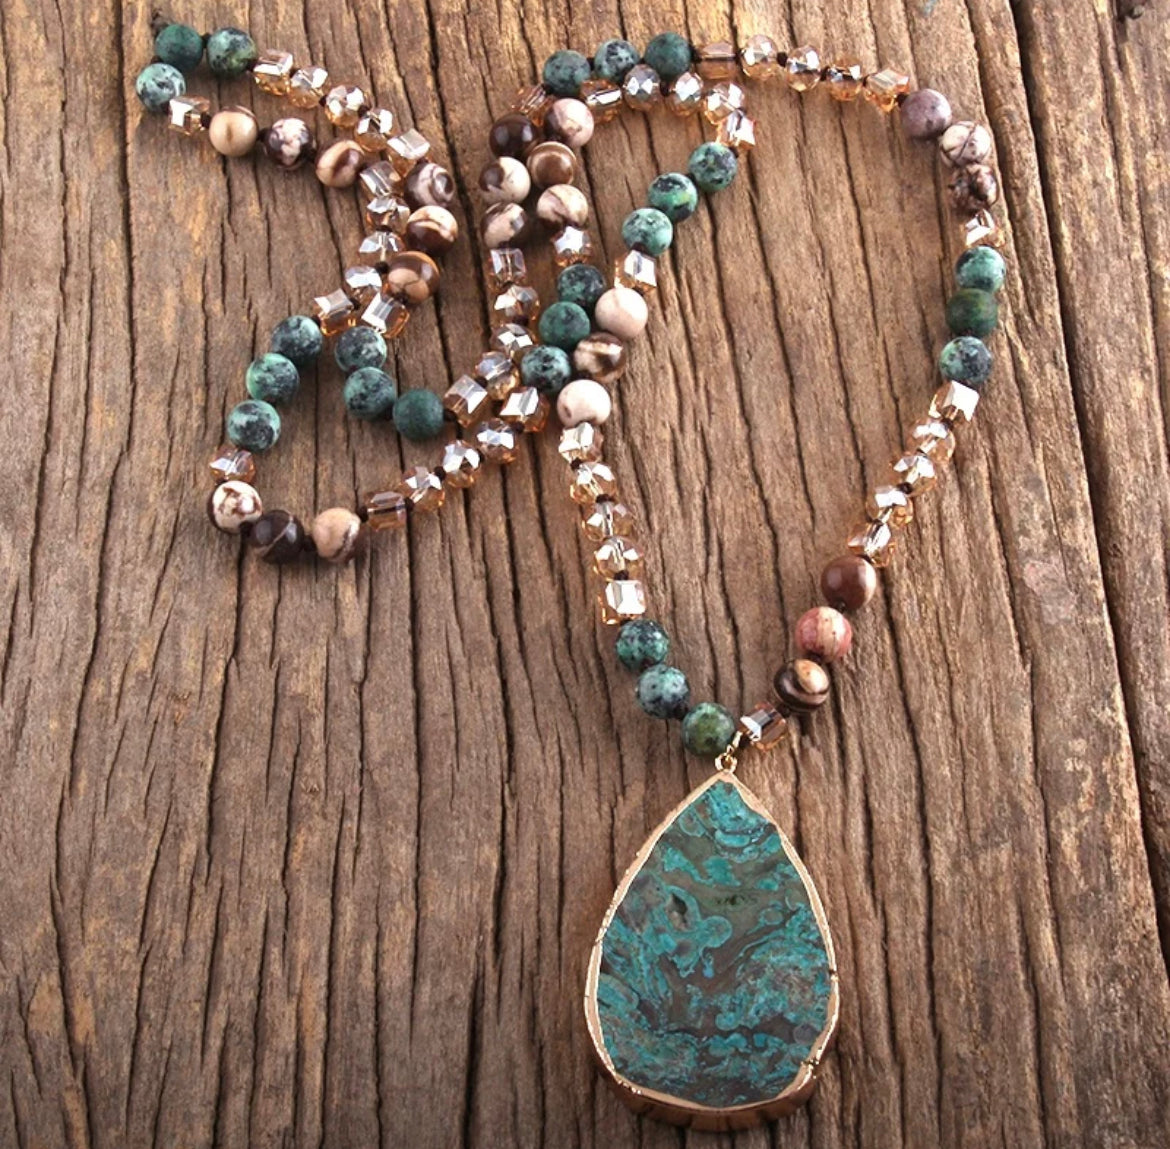 Tribal Necklaces for Women at Boho & Mala